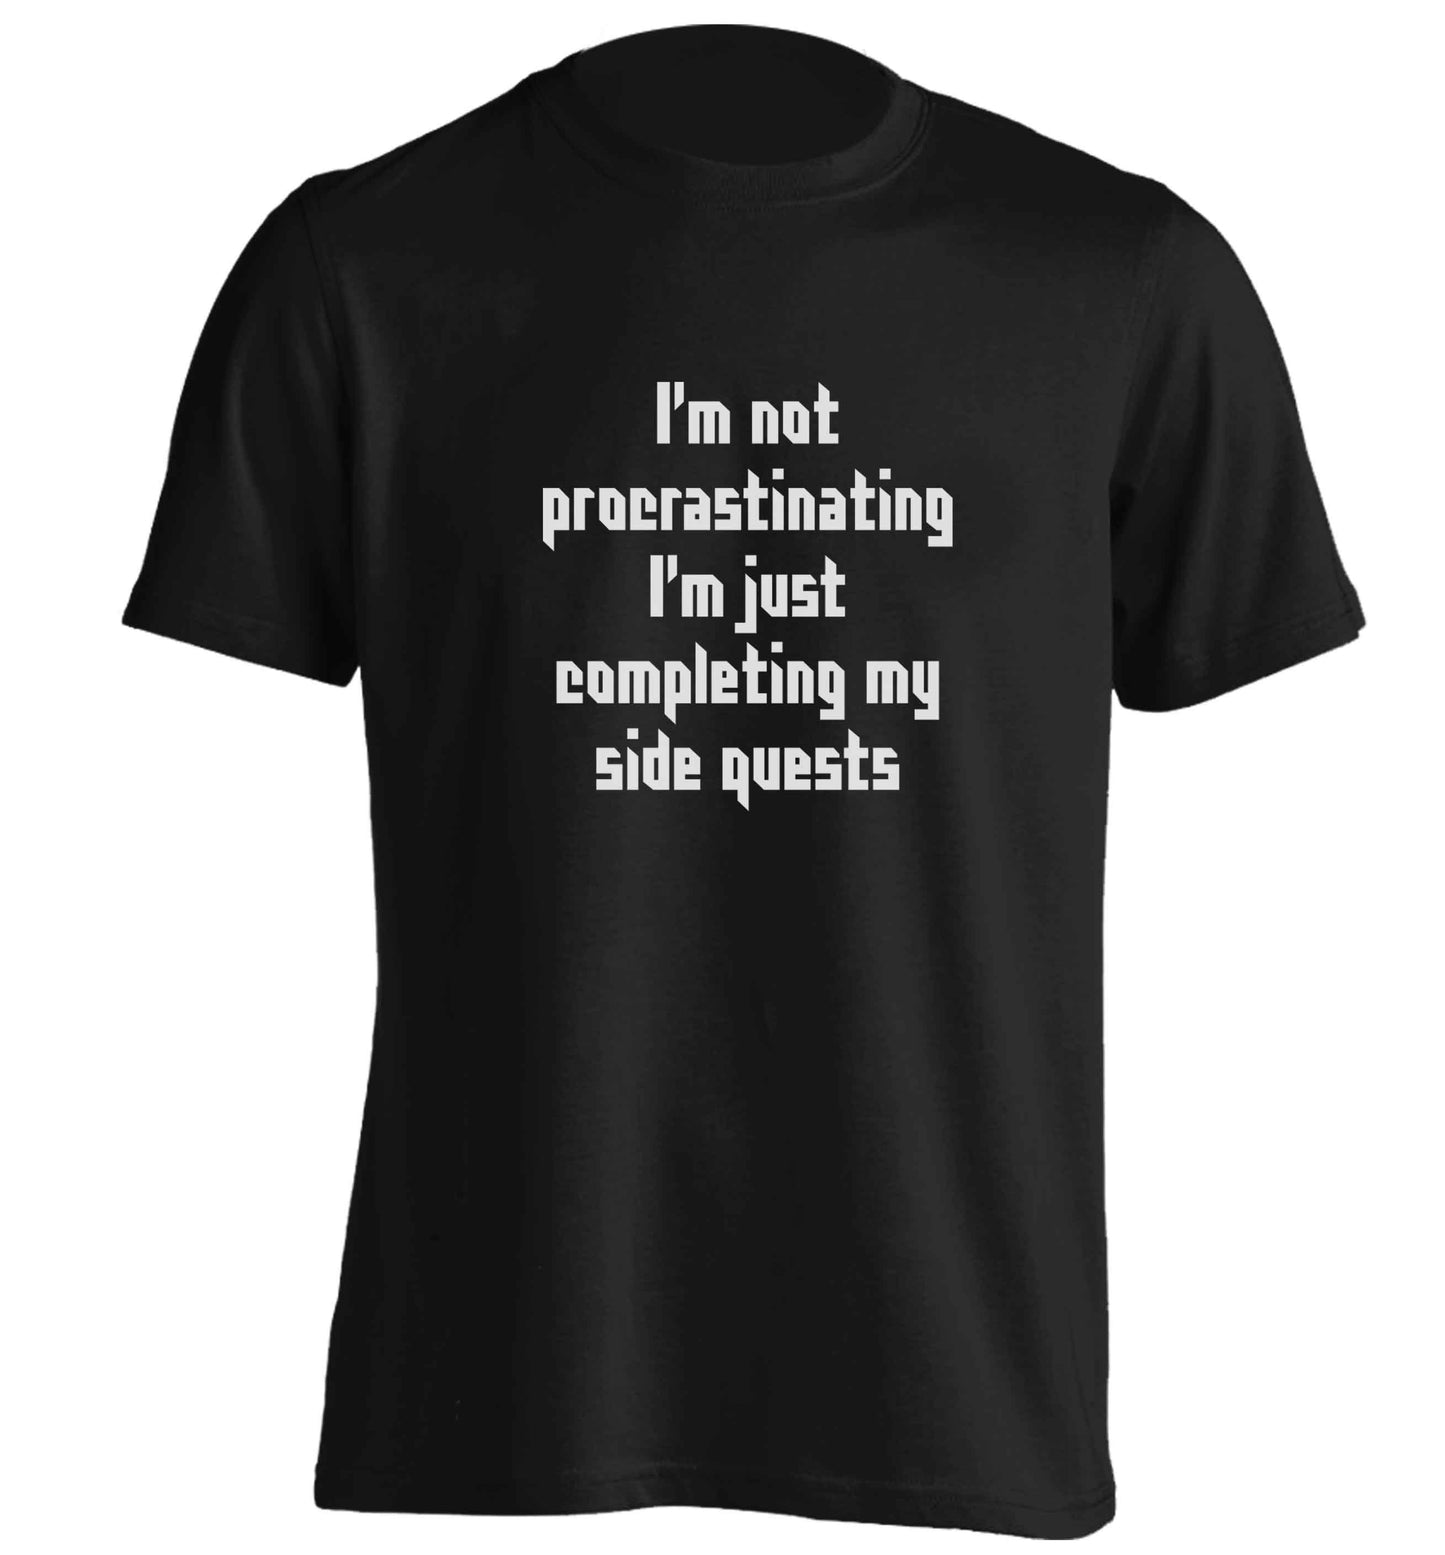 I'm not procrastinating I'm just completing my side quests adults unisex black Tshirt 2XL